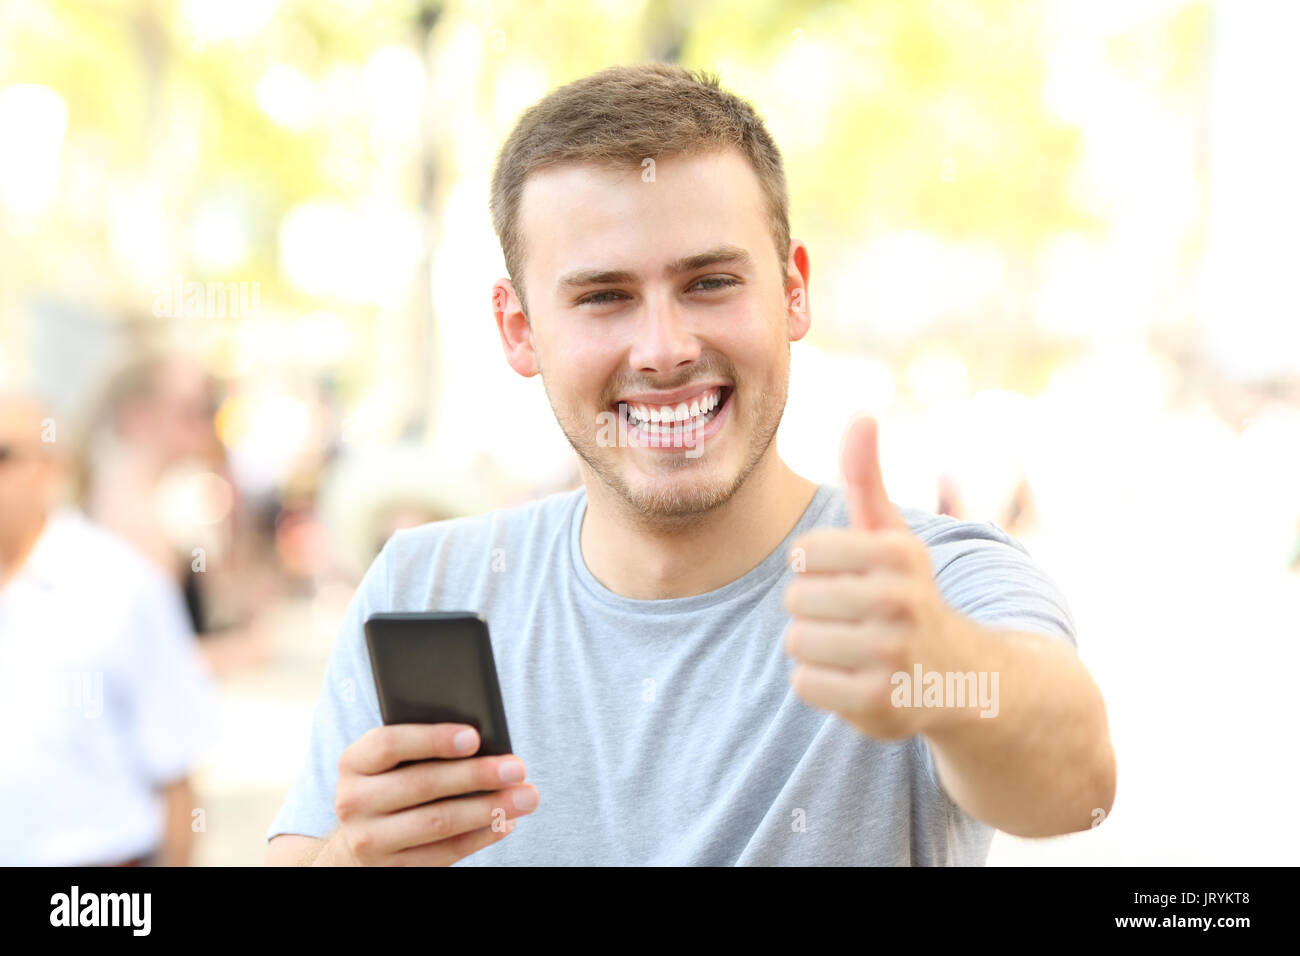 Man with thumbs up holding phone looking at you on the street Stock Photo